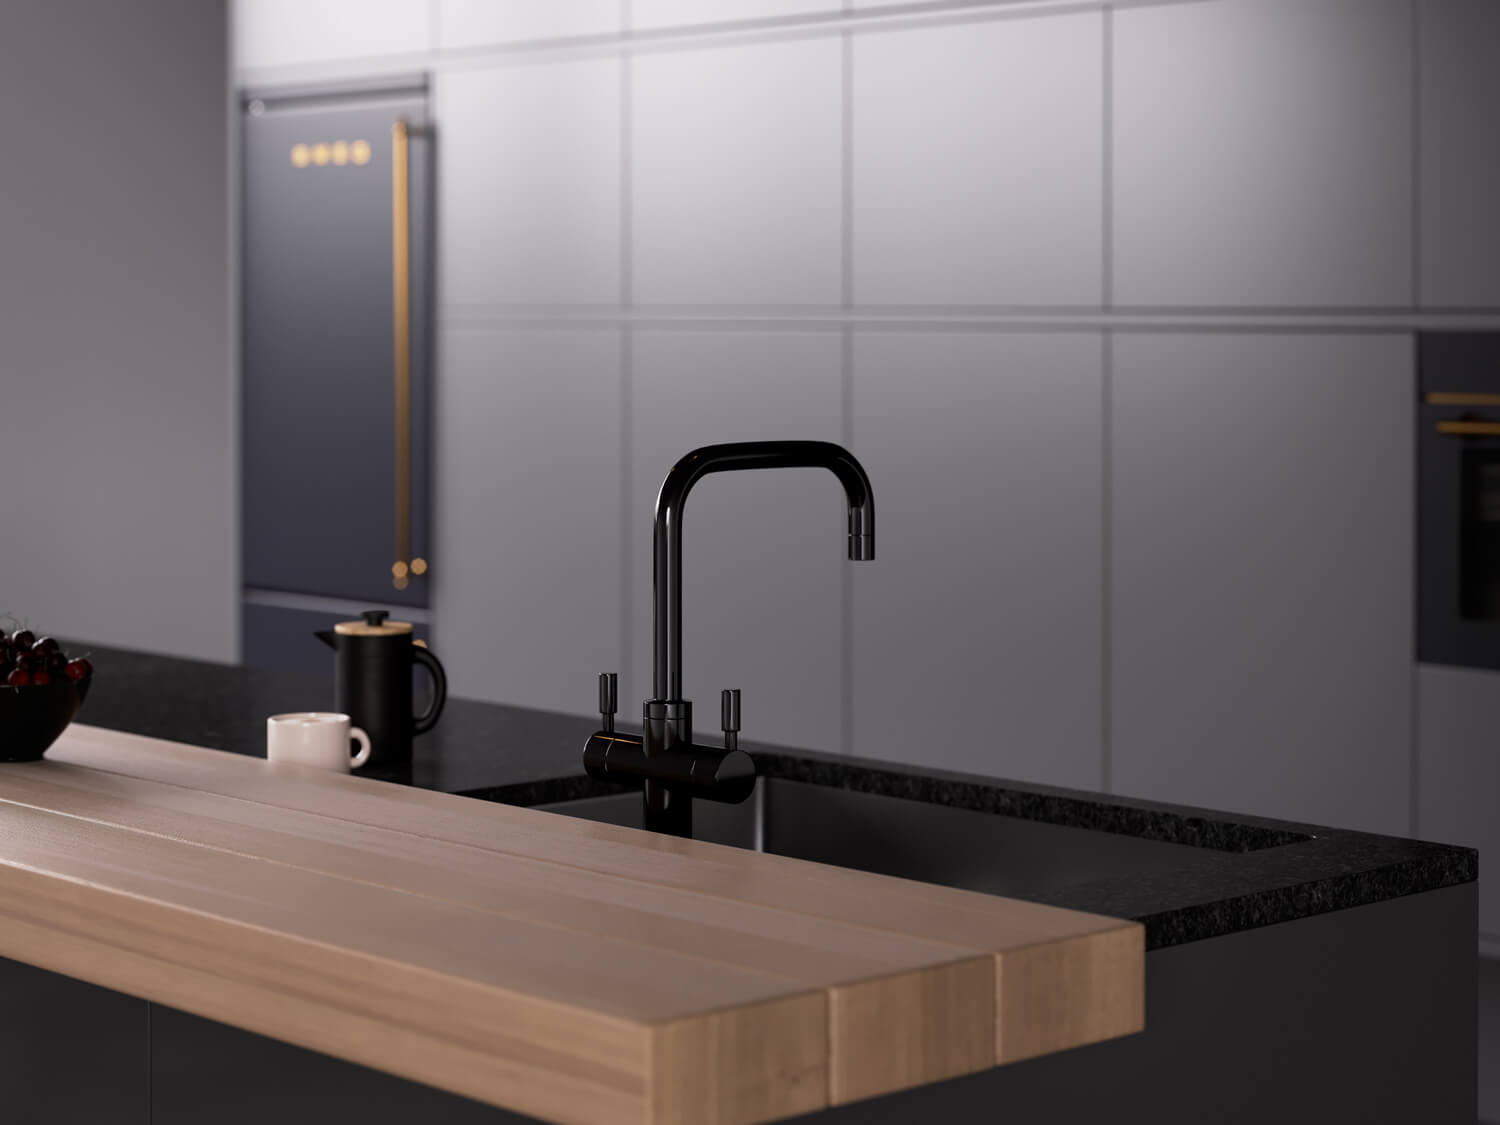 Close up on tap in modern kitchen 3D rendering showing tap product CGI - monochrome design with wood island in front of grey wall and fitted fridge.